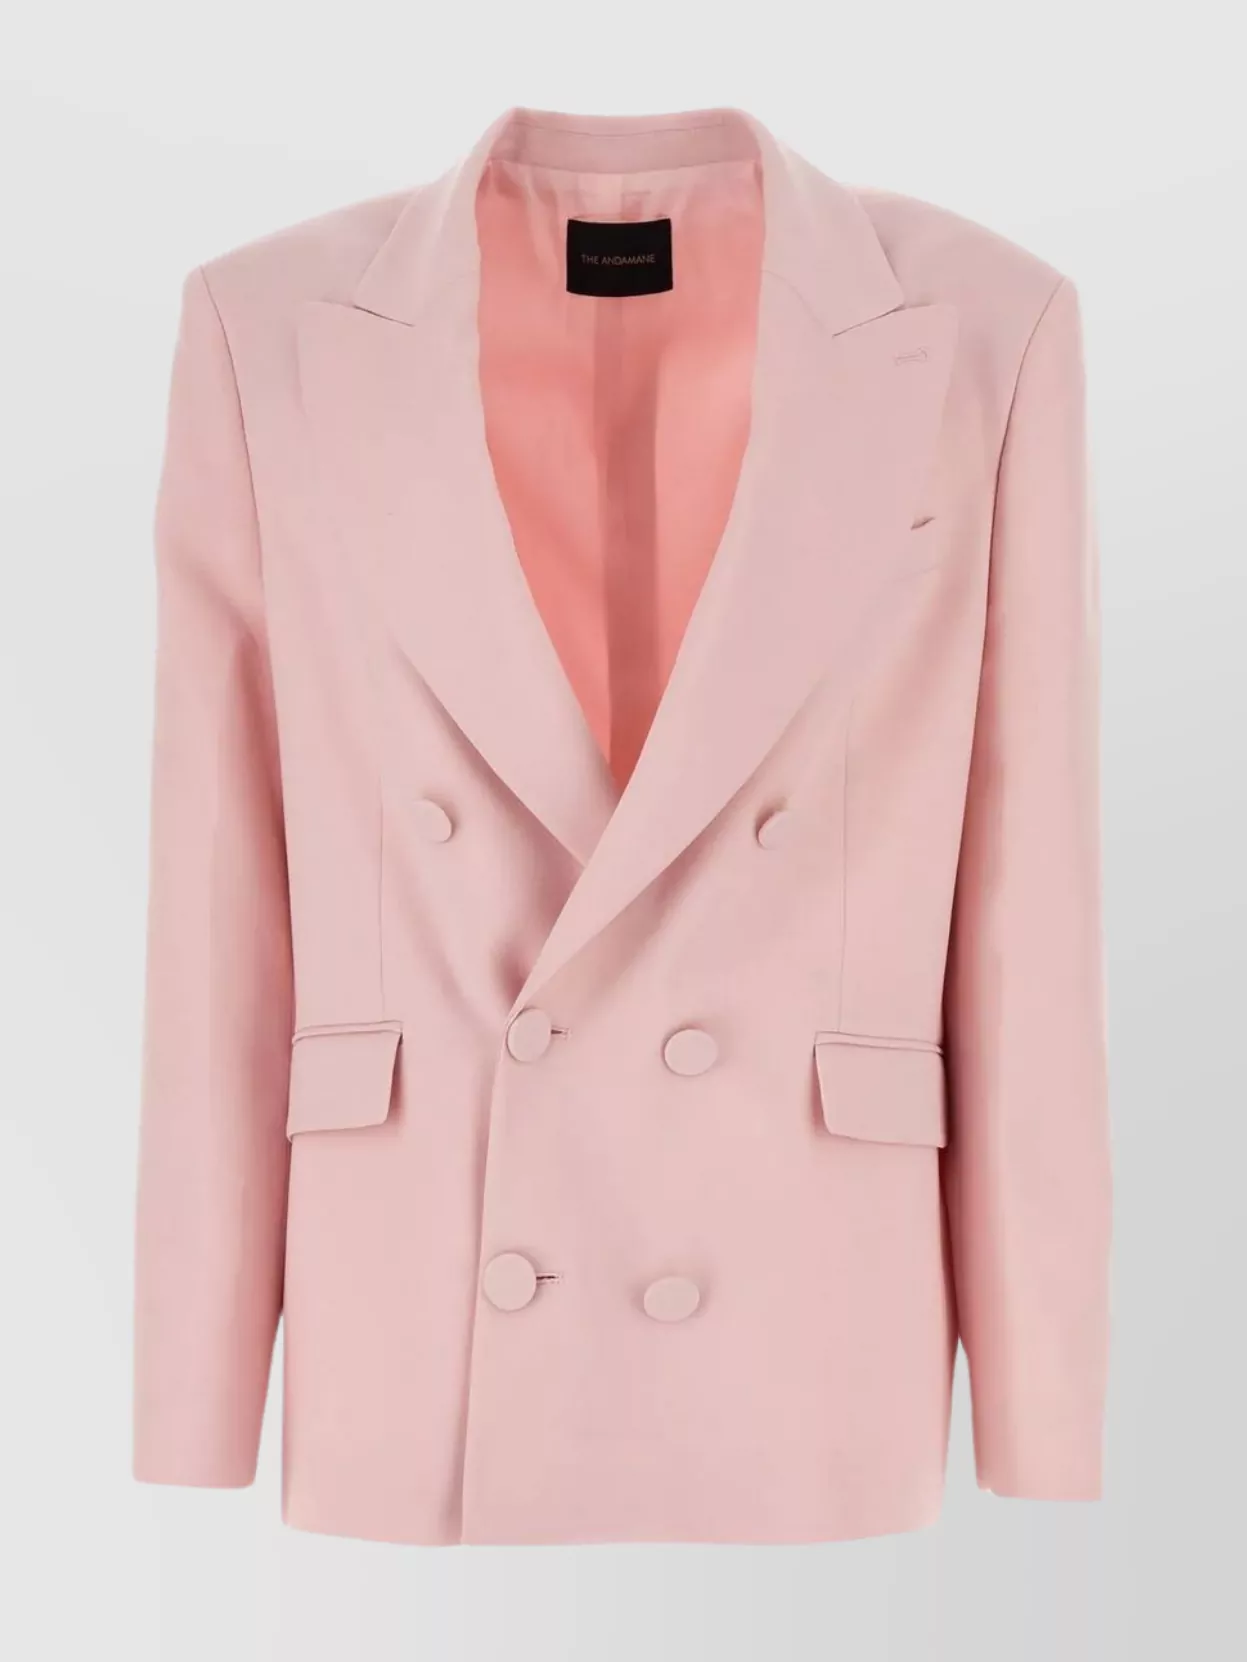 Shop The Andamane Structured Blazer With Shoulder Padding And Multiple Pockets